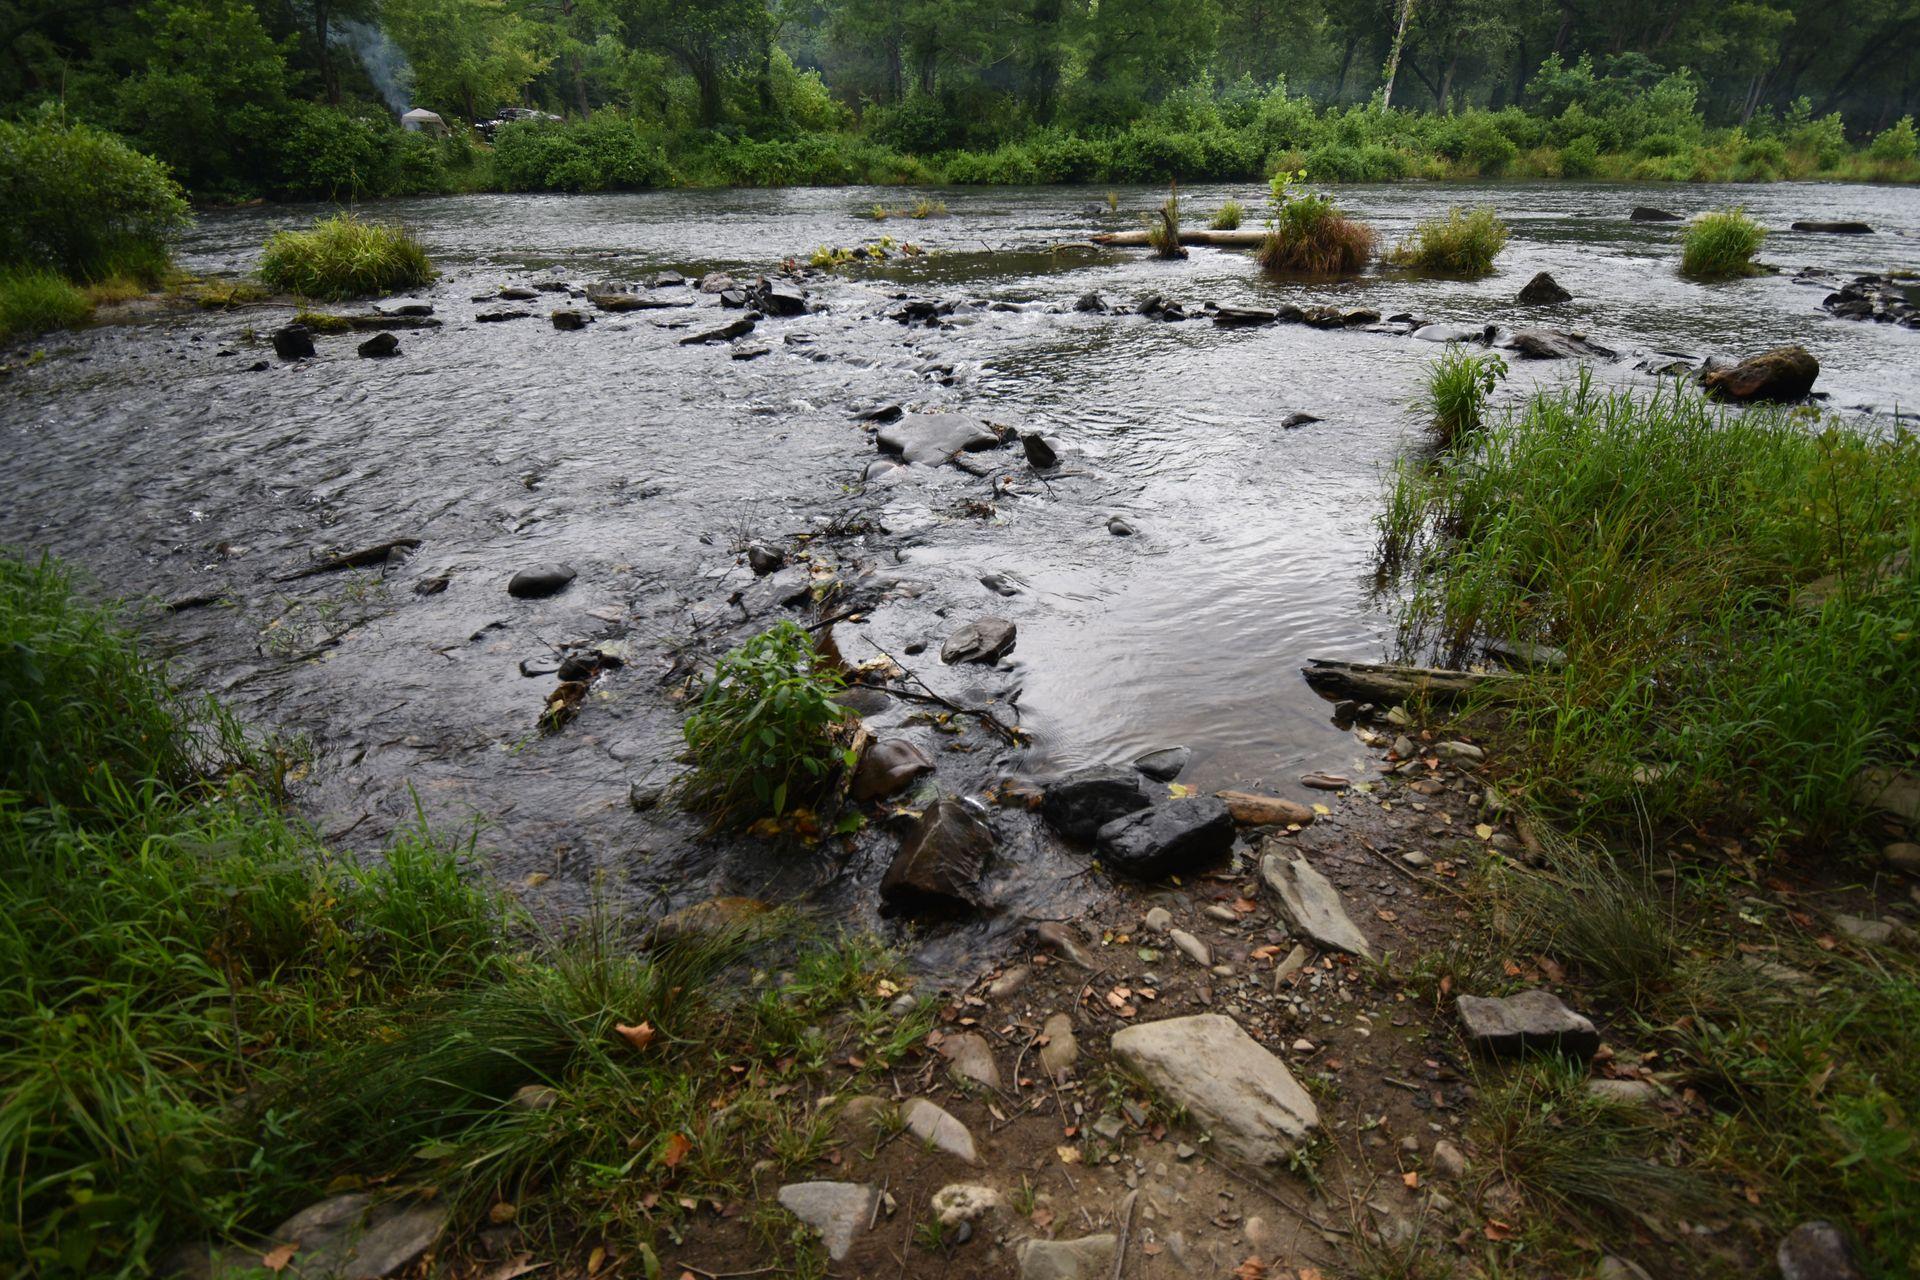 A close up view of the river next to the camping area.